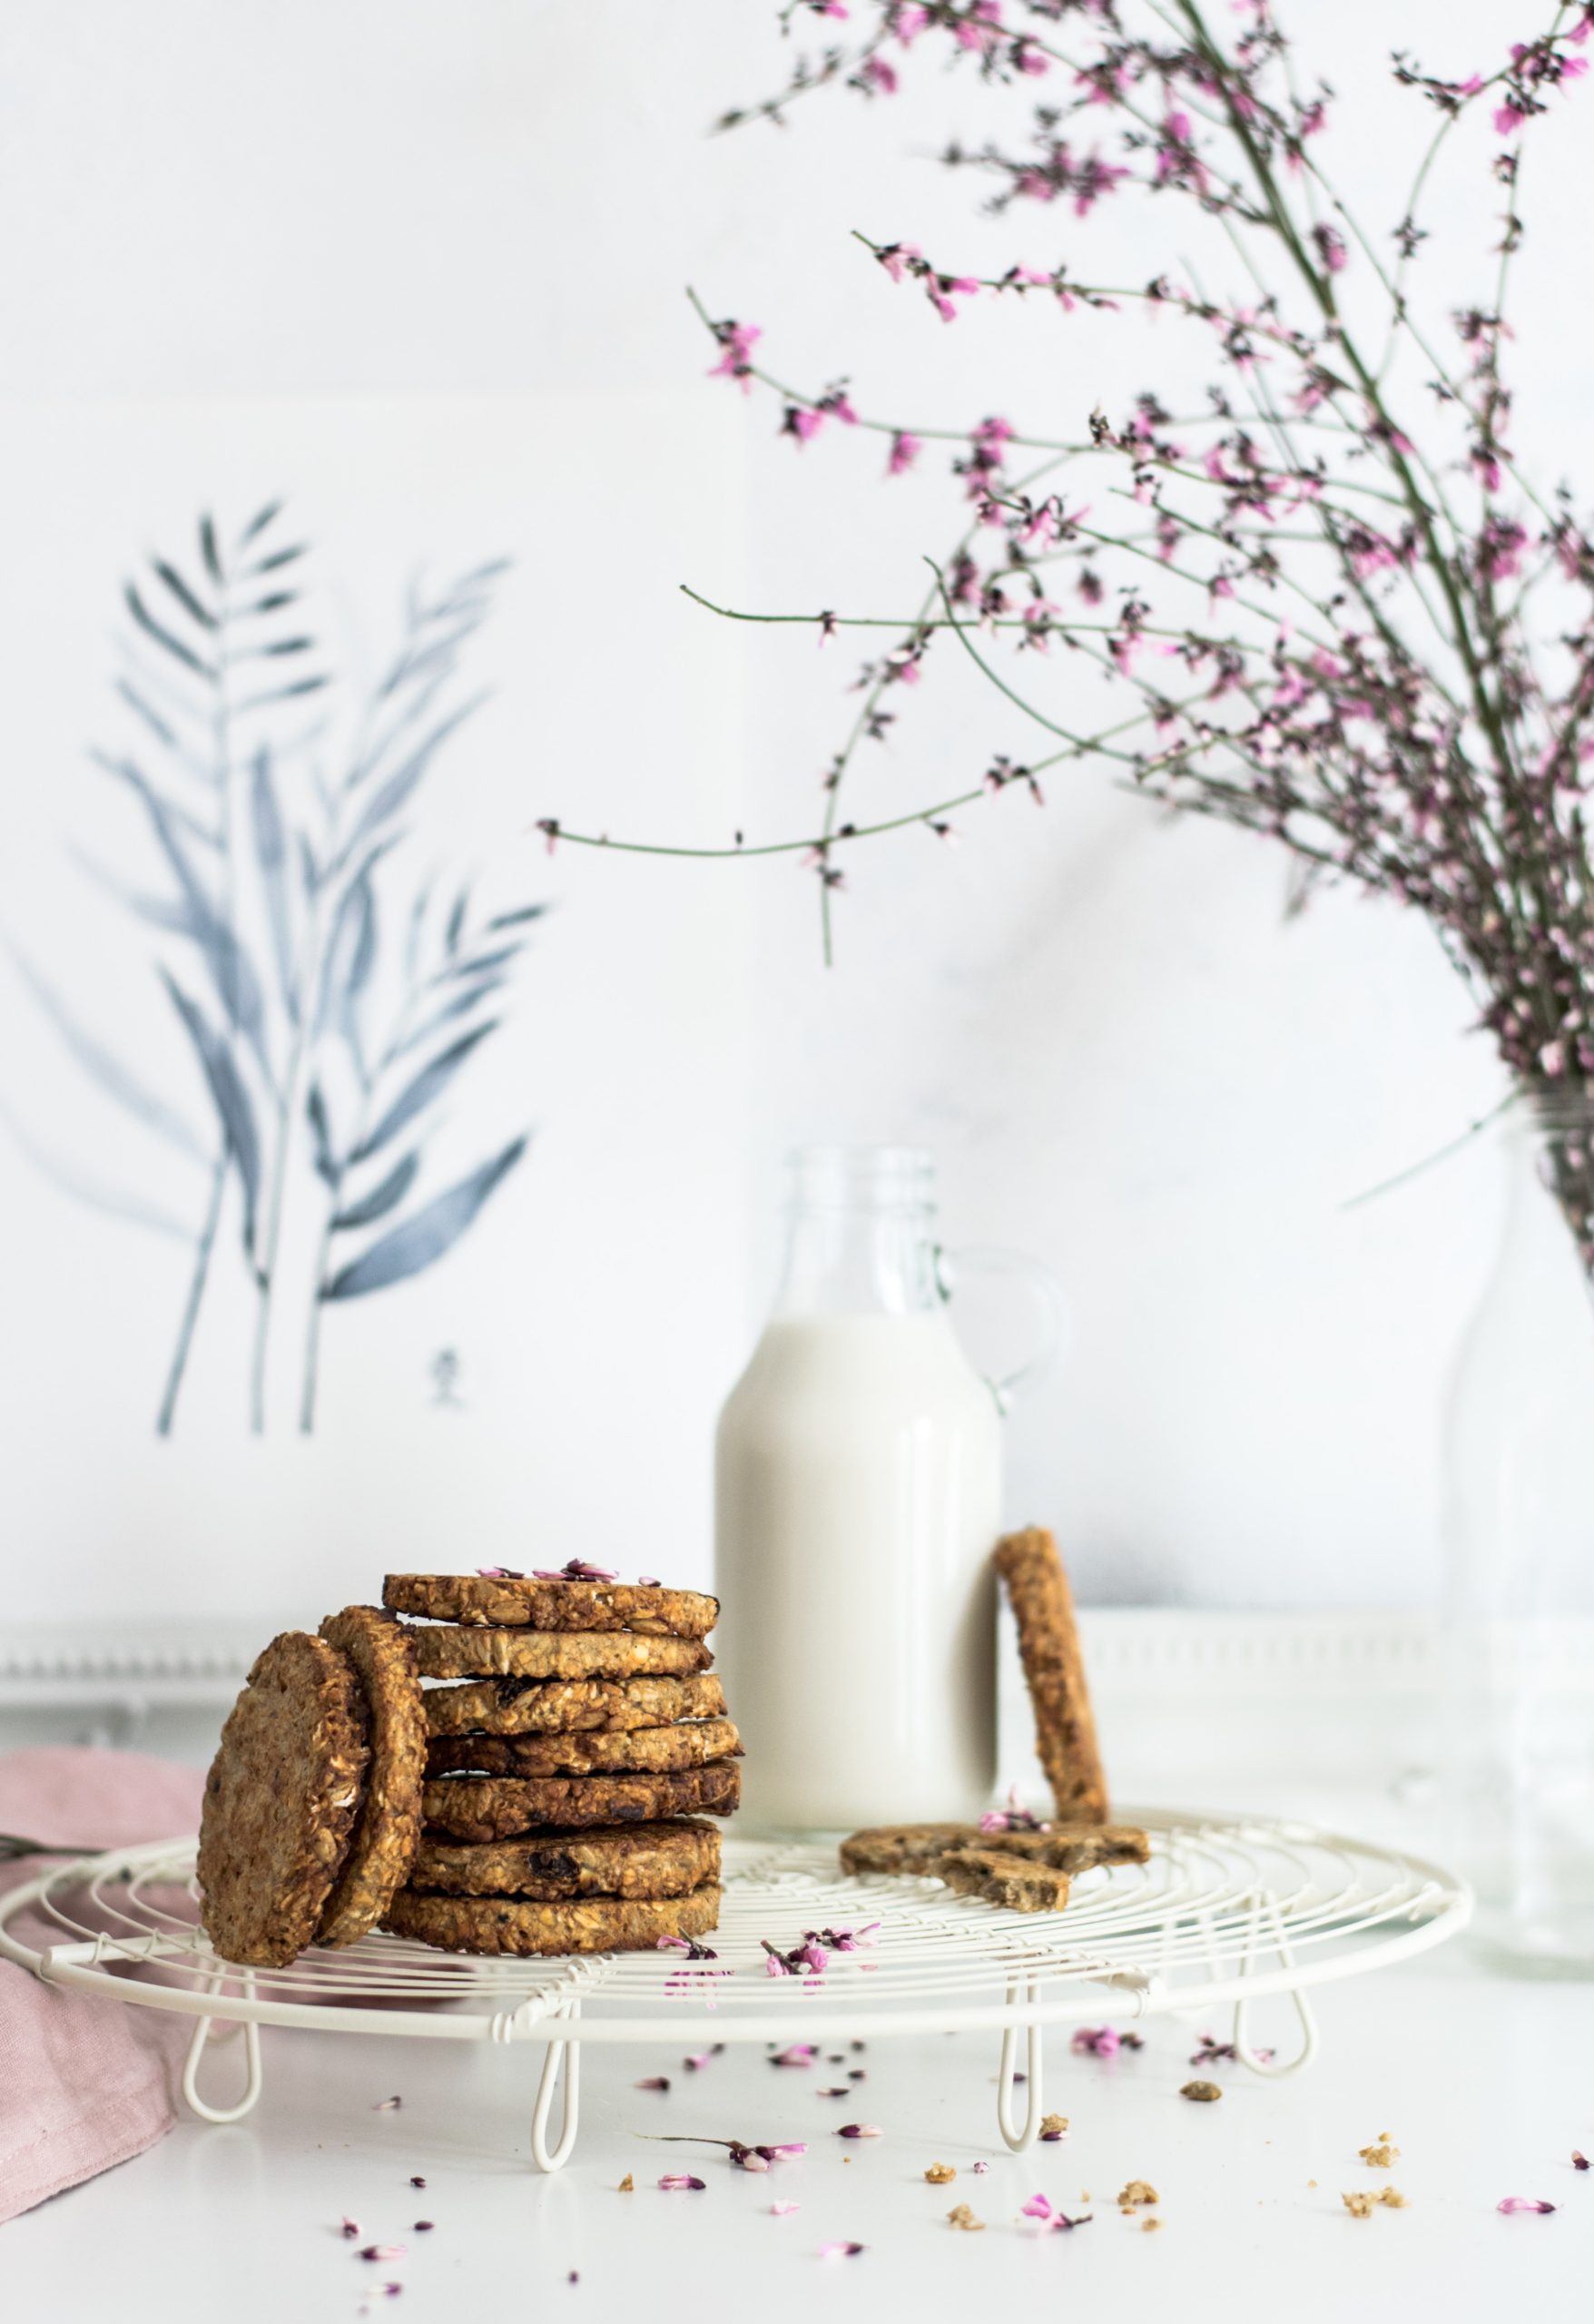 cookies with milk, how to shop smarter to lose weight. 